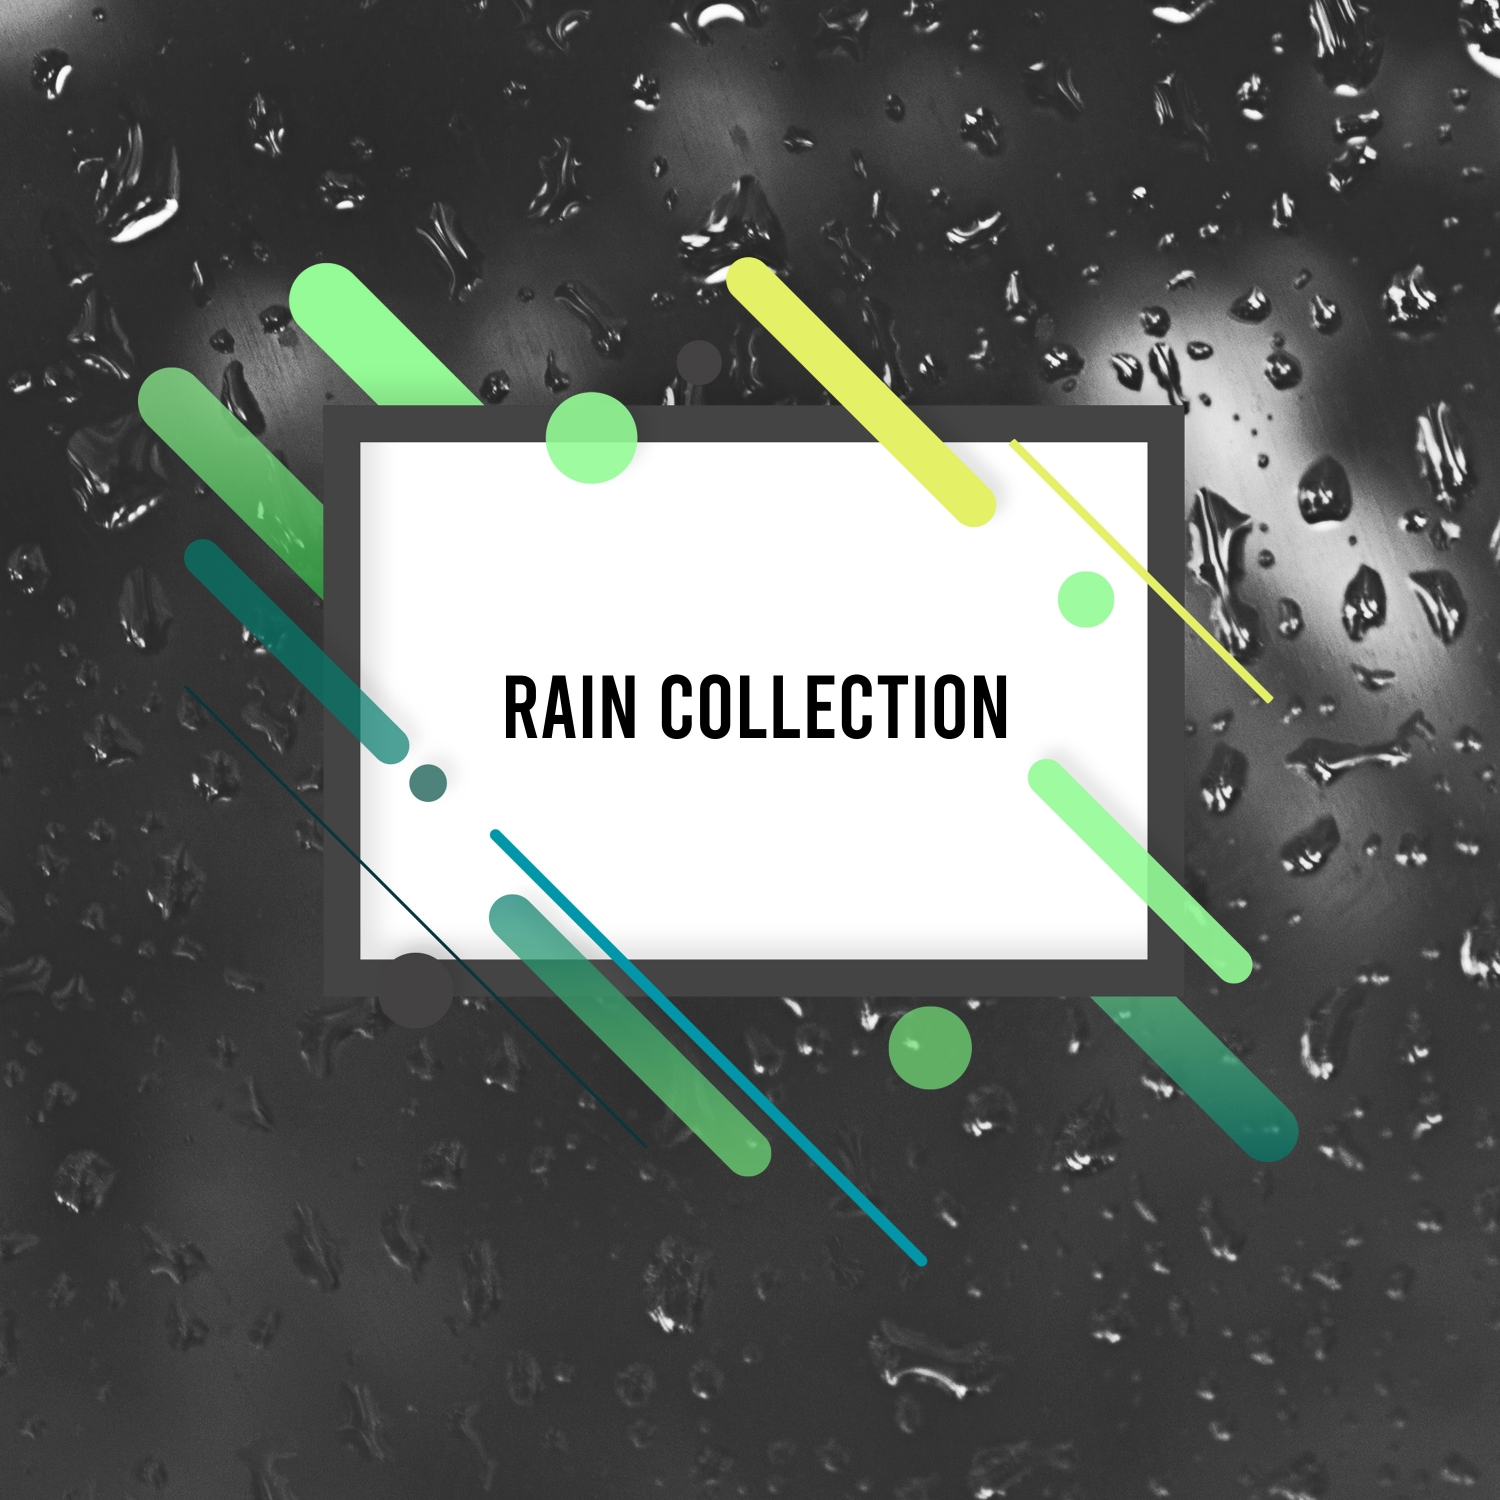 A Collection of Rain Sounds - Perfect for Sleeping, Meditation, Studying, Baby Sleep Aids or Yoga